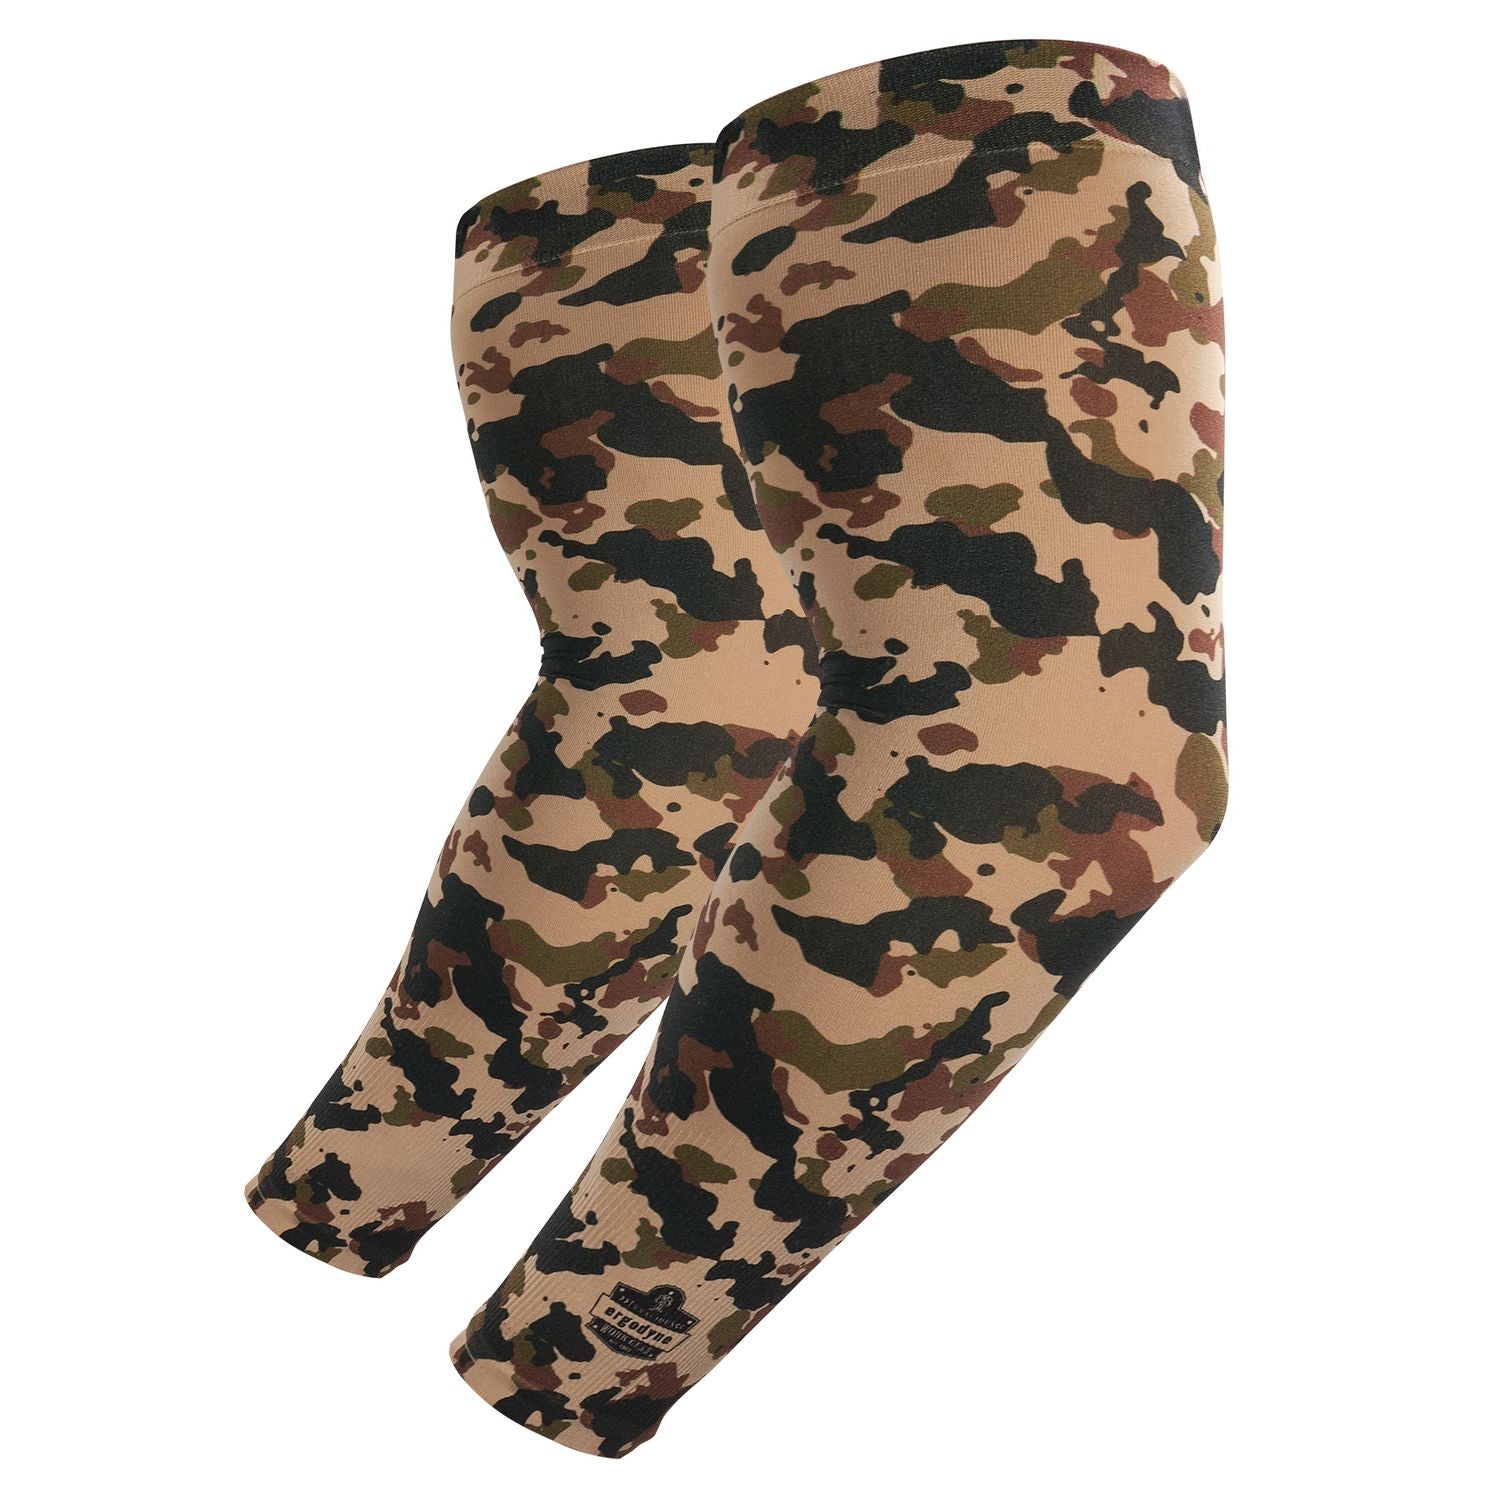 chill-its-6695-sun-protection-arm-sleeves-polyester-spandex-medium-large-camo-ships-in-1-3-business-days_ego12191 - 1